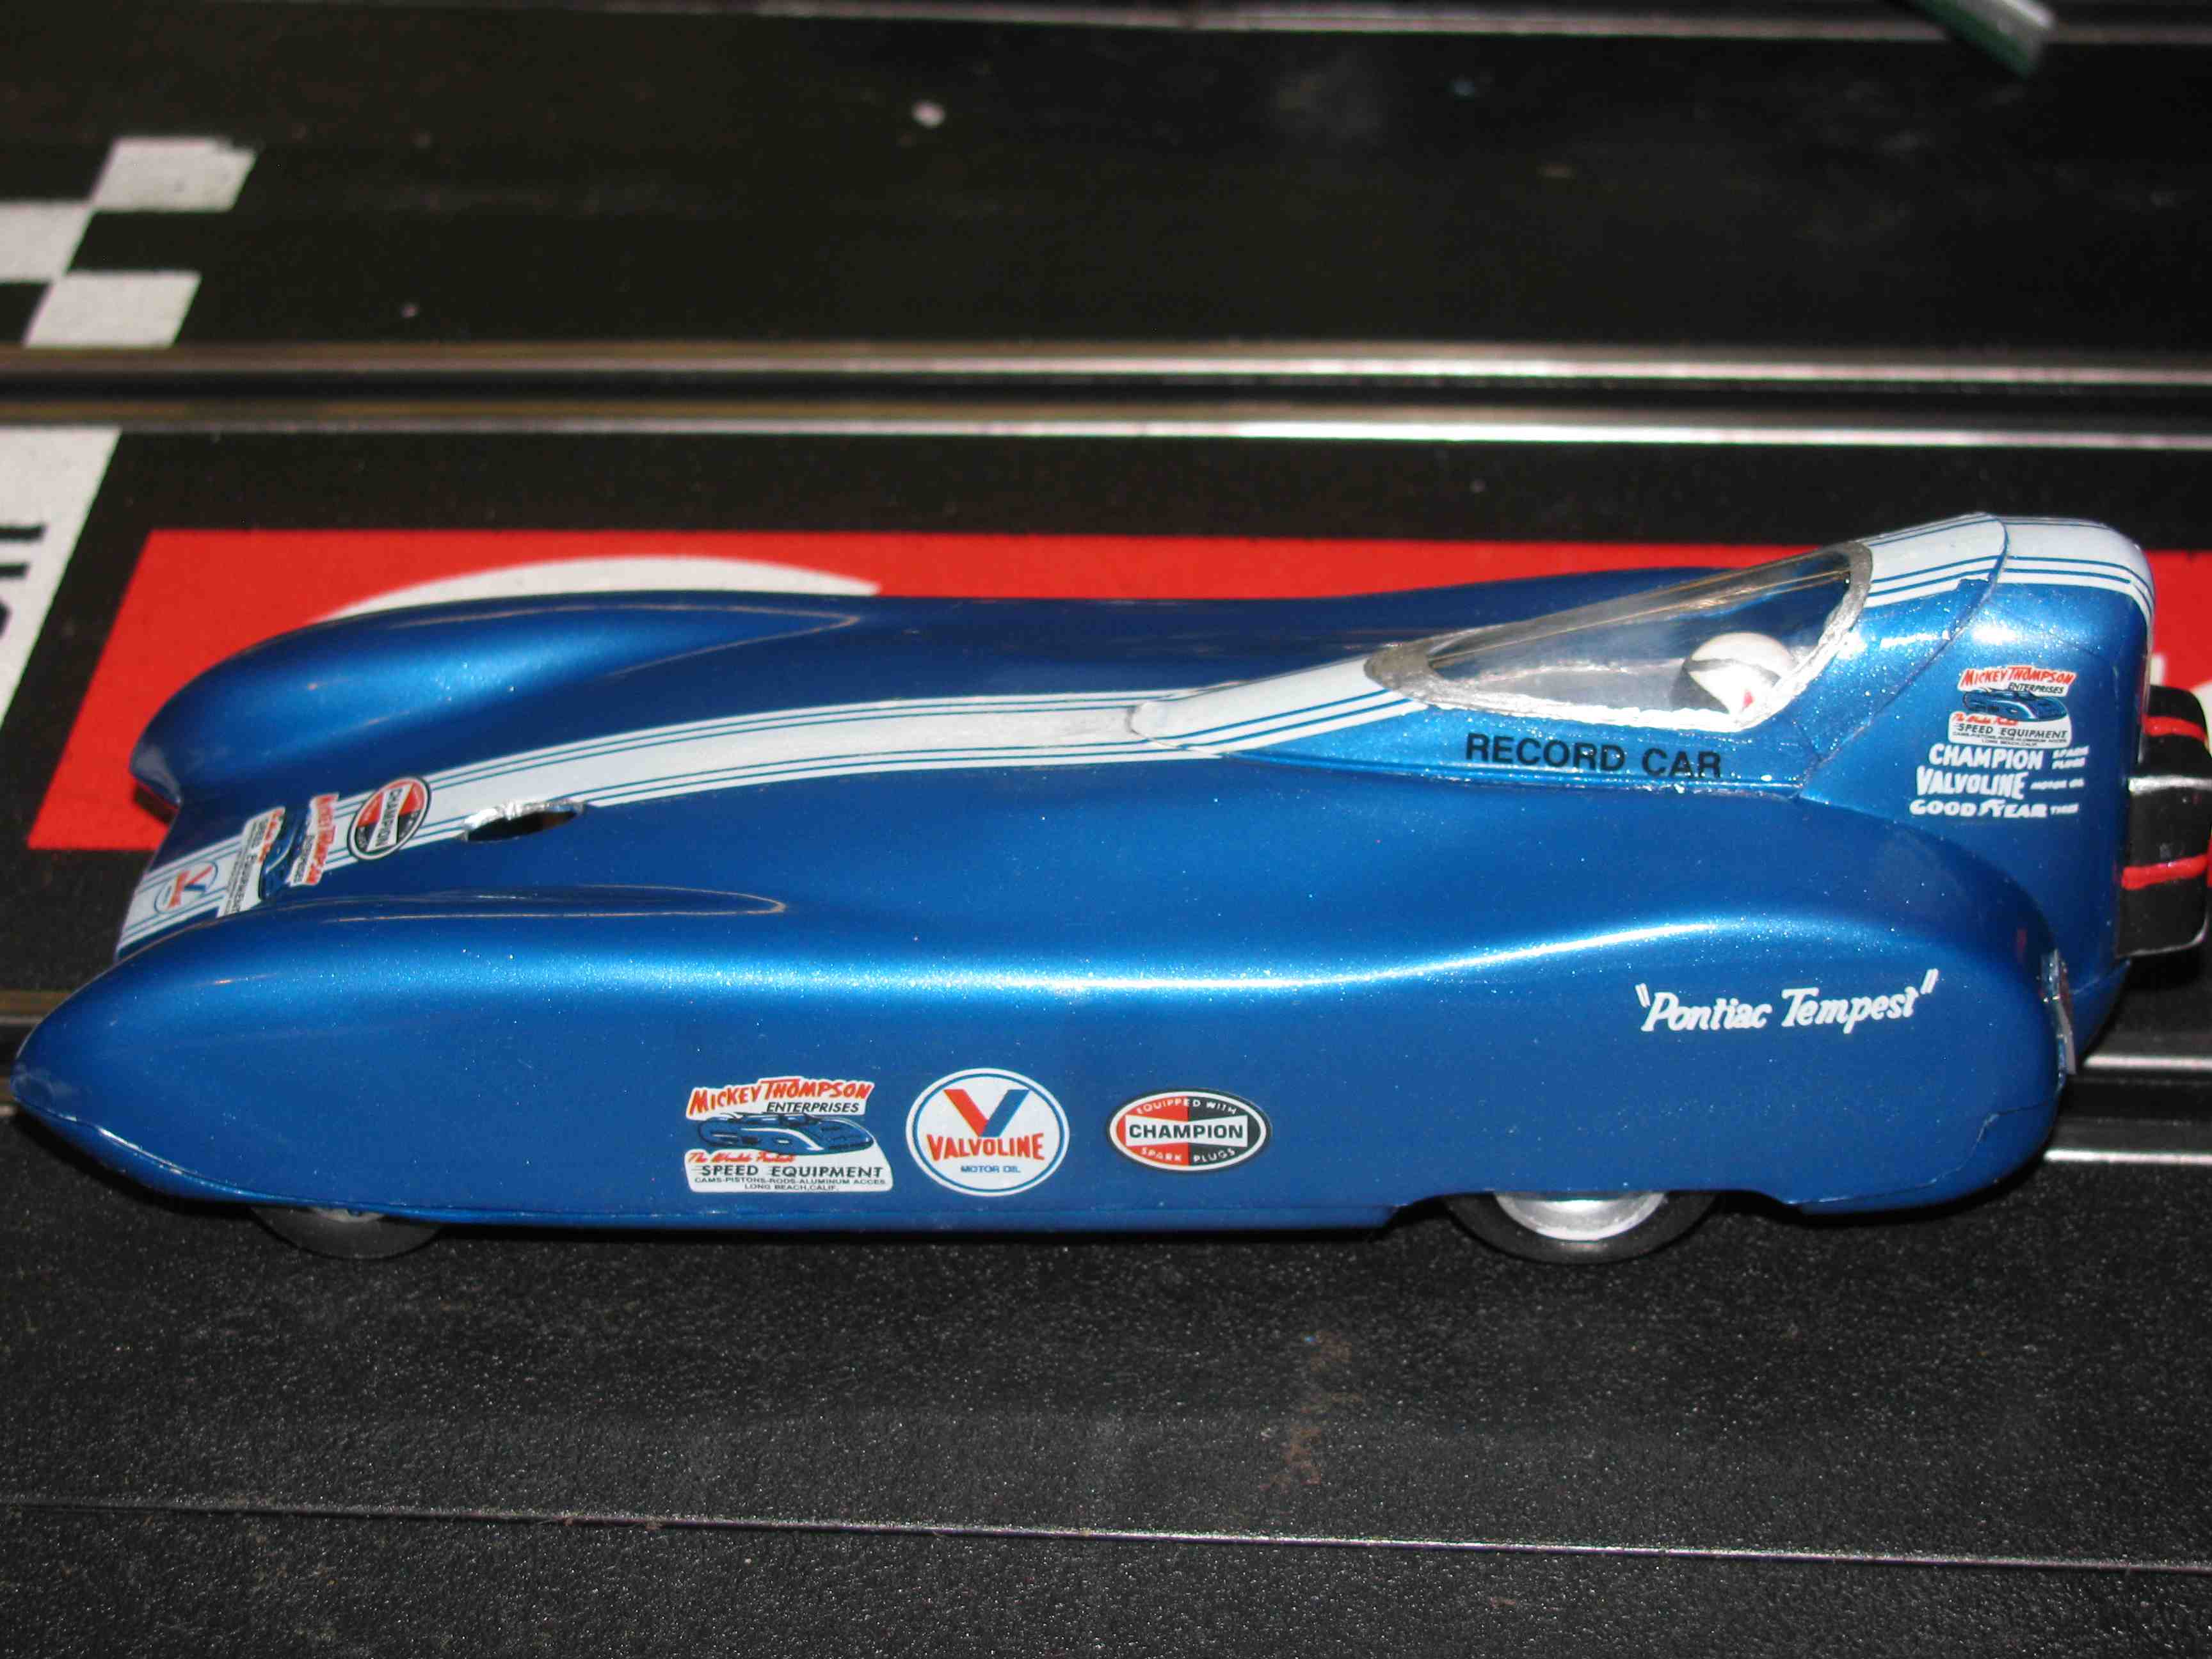 * SOLD * * Special Package Price for Charles * Revell Mickey Thompson Attempt 1 Record Car Slot Car 1/24 Scale